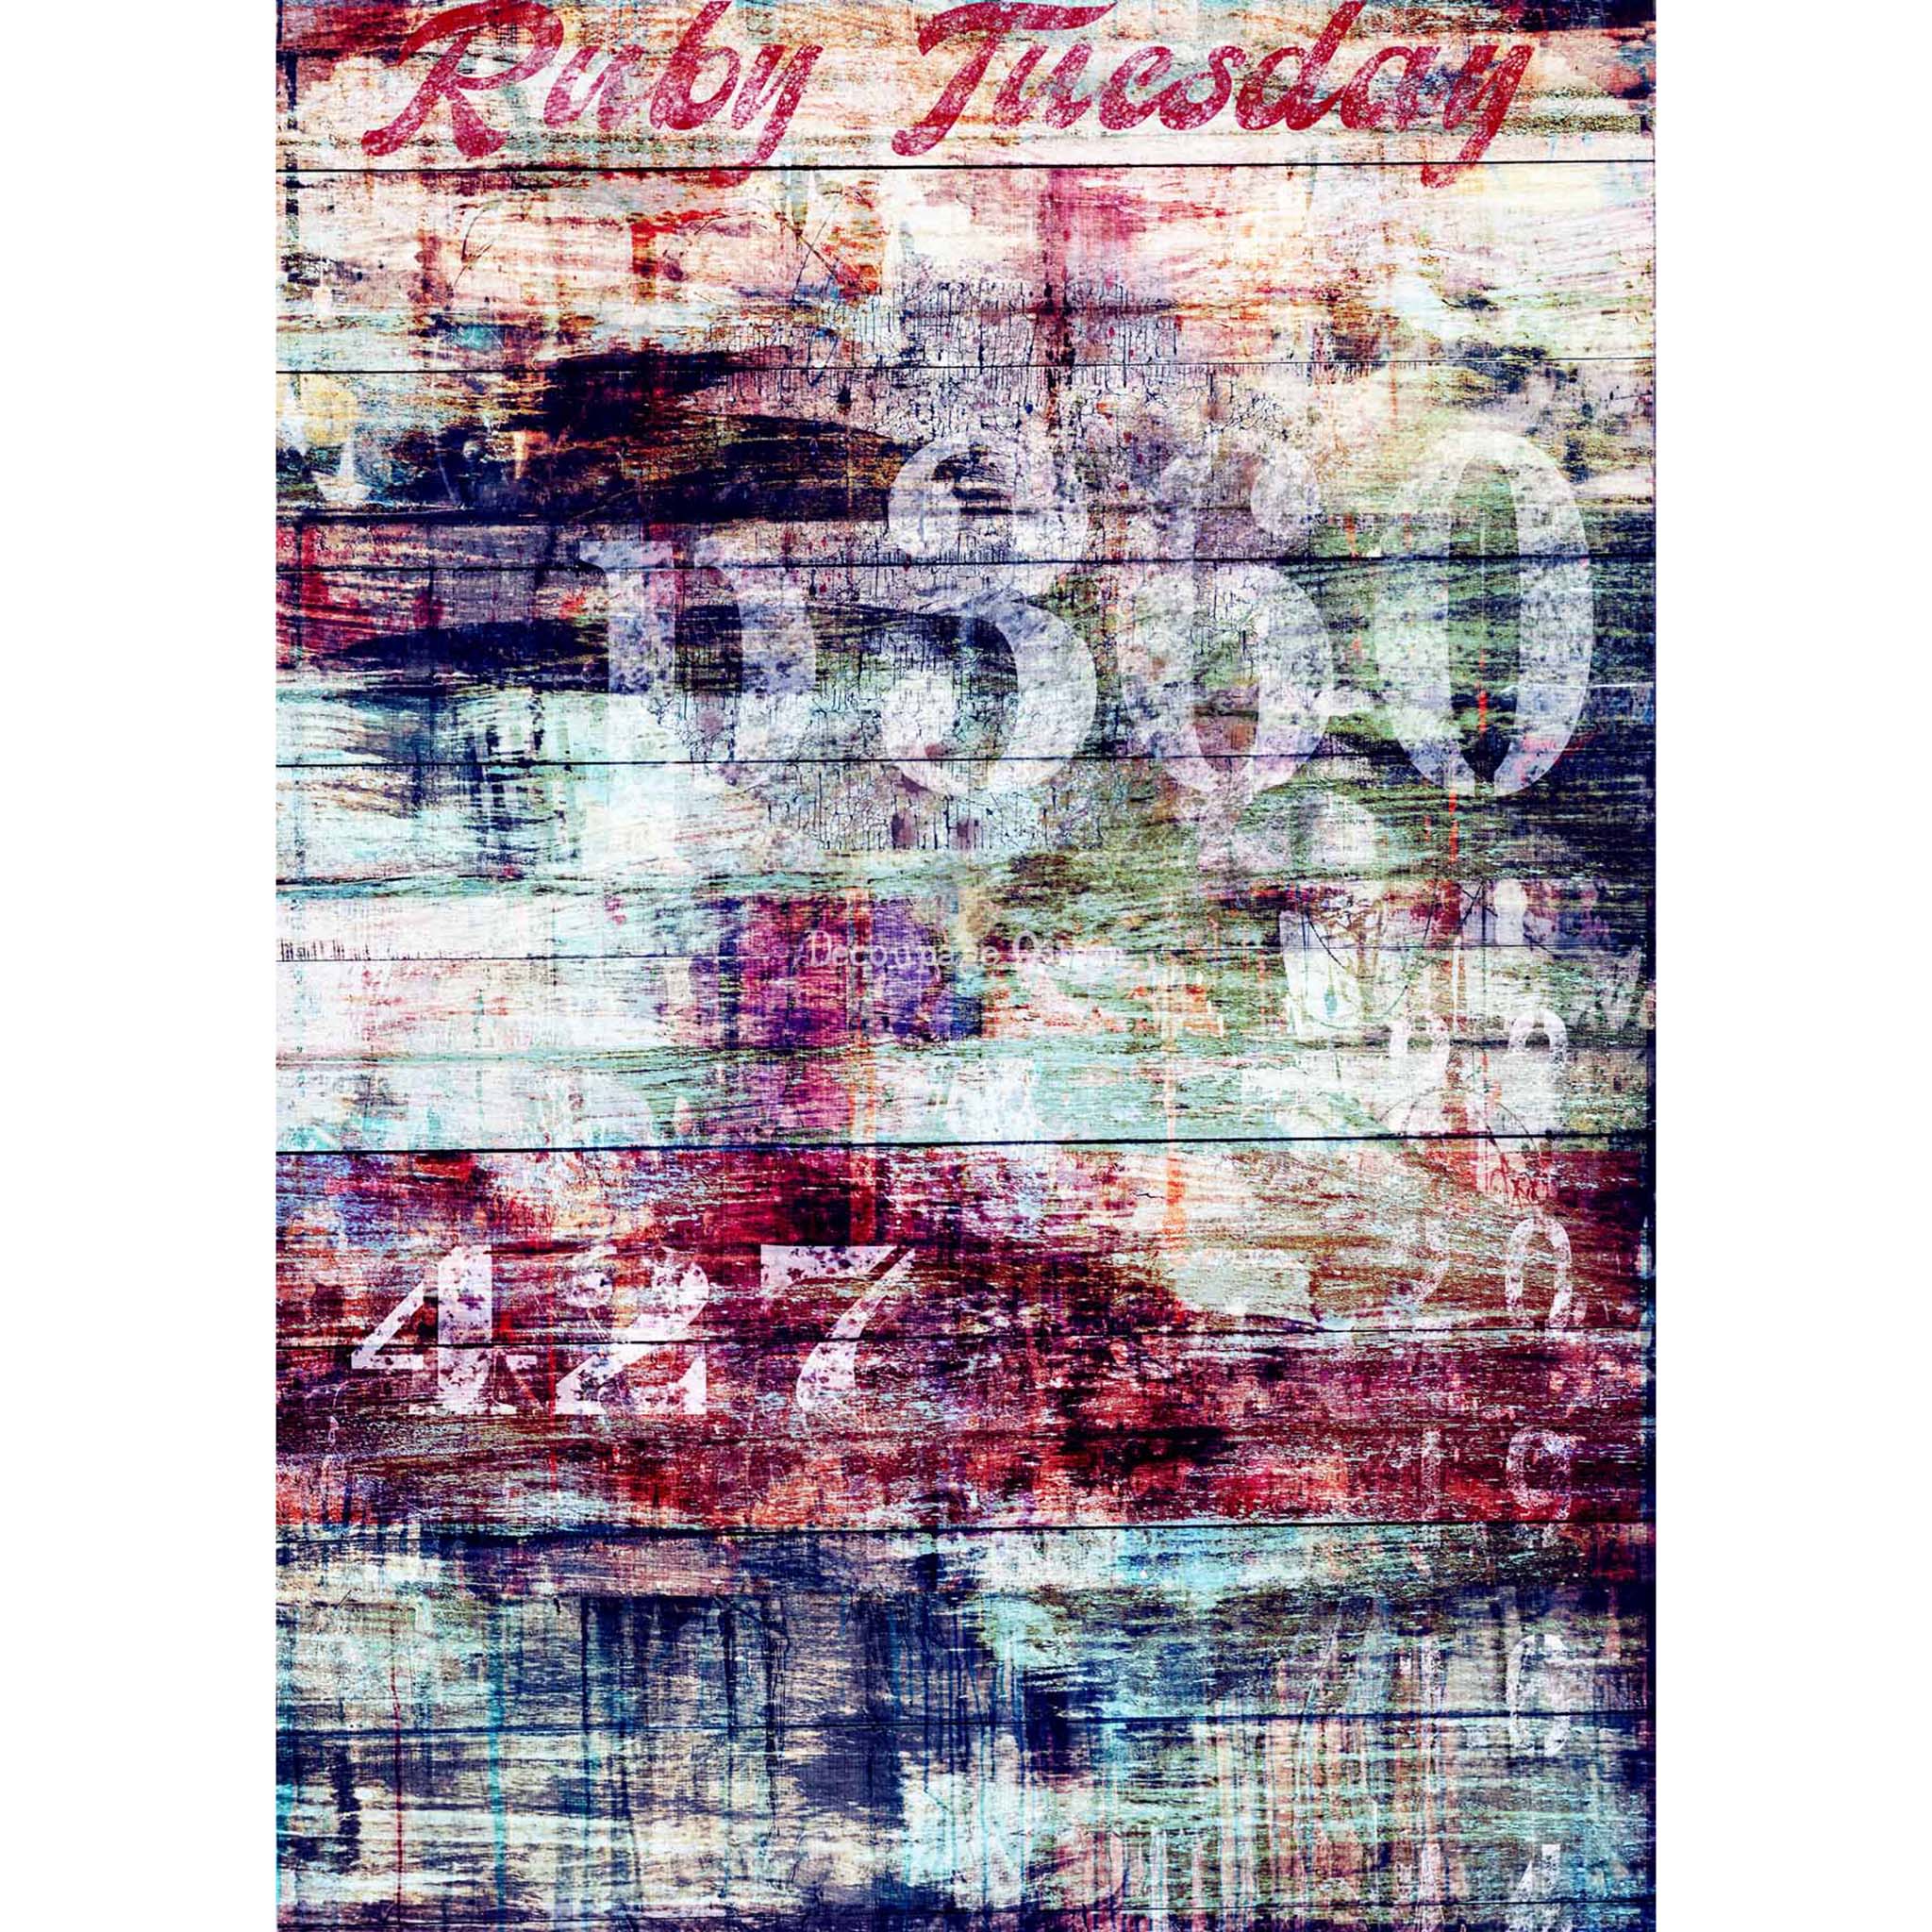 Rice paper that features a unique collection of painted weathered wooden planks with the words "Ruby Tuesday" and block numbers stenciled on them. White borders are on the sides.